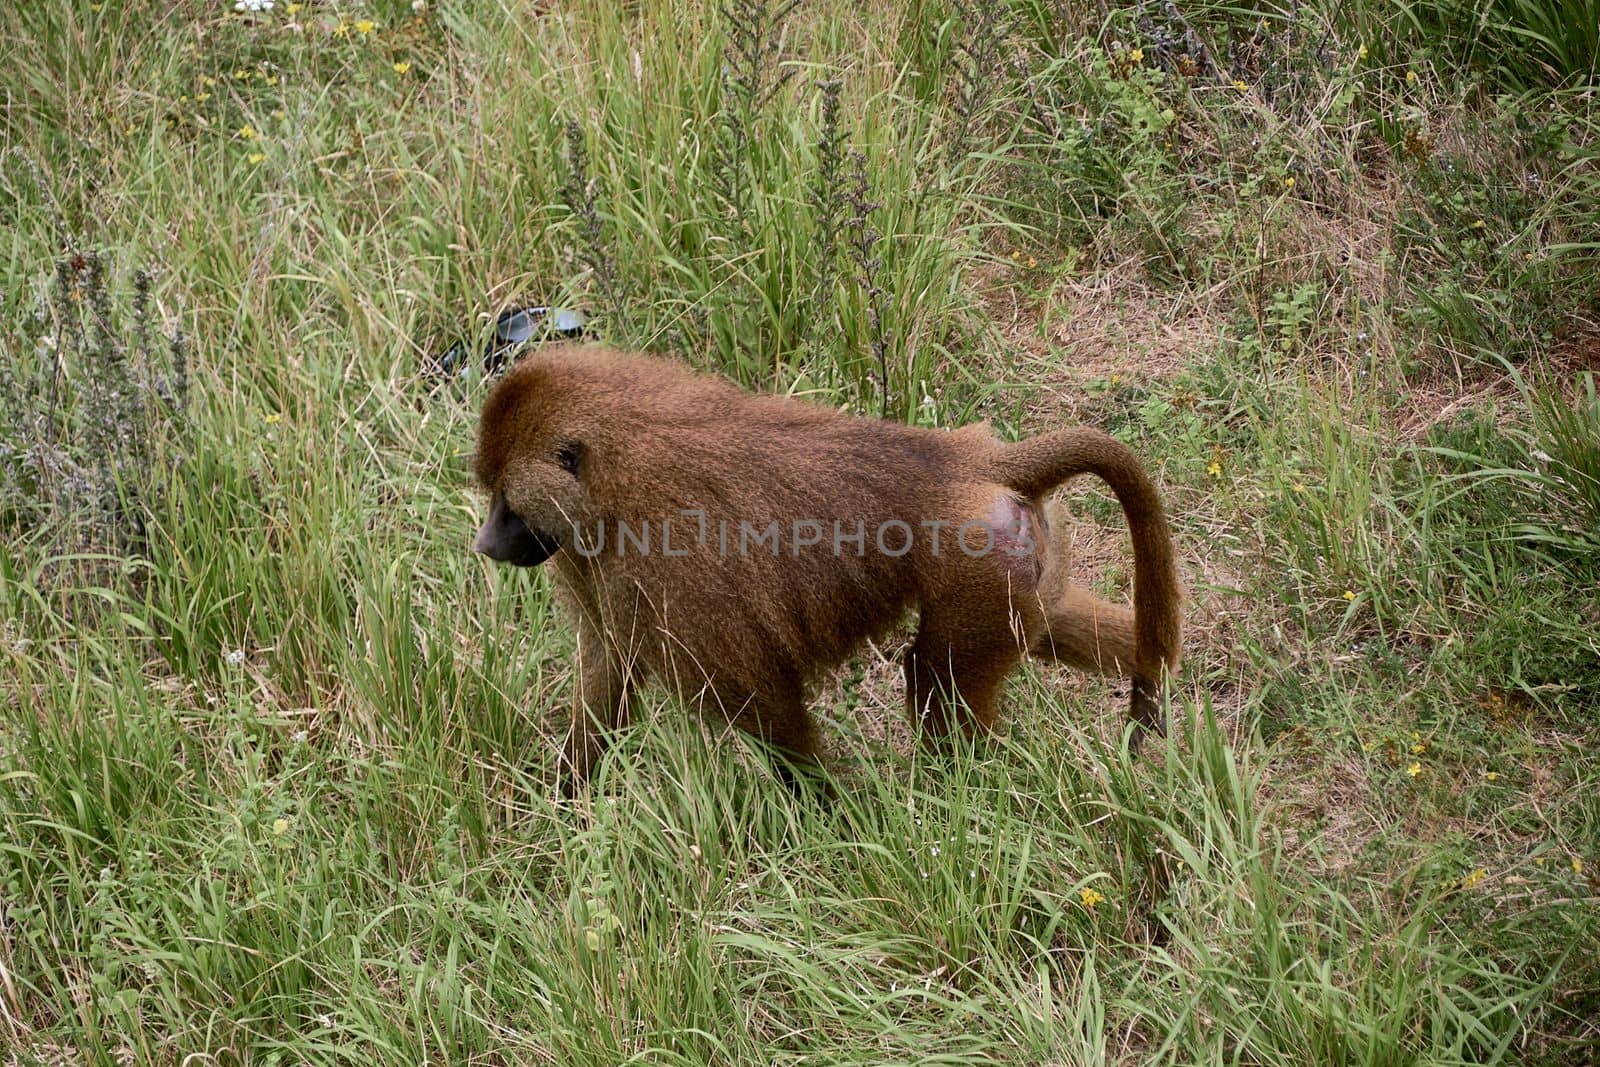 Guinean Papion Monkey walking on the grass. Ape, solitary, unmanned, green